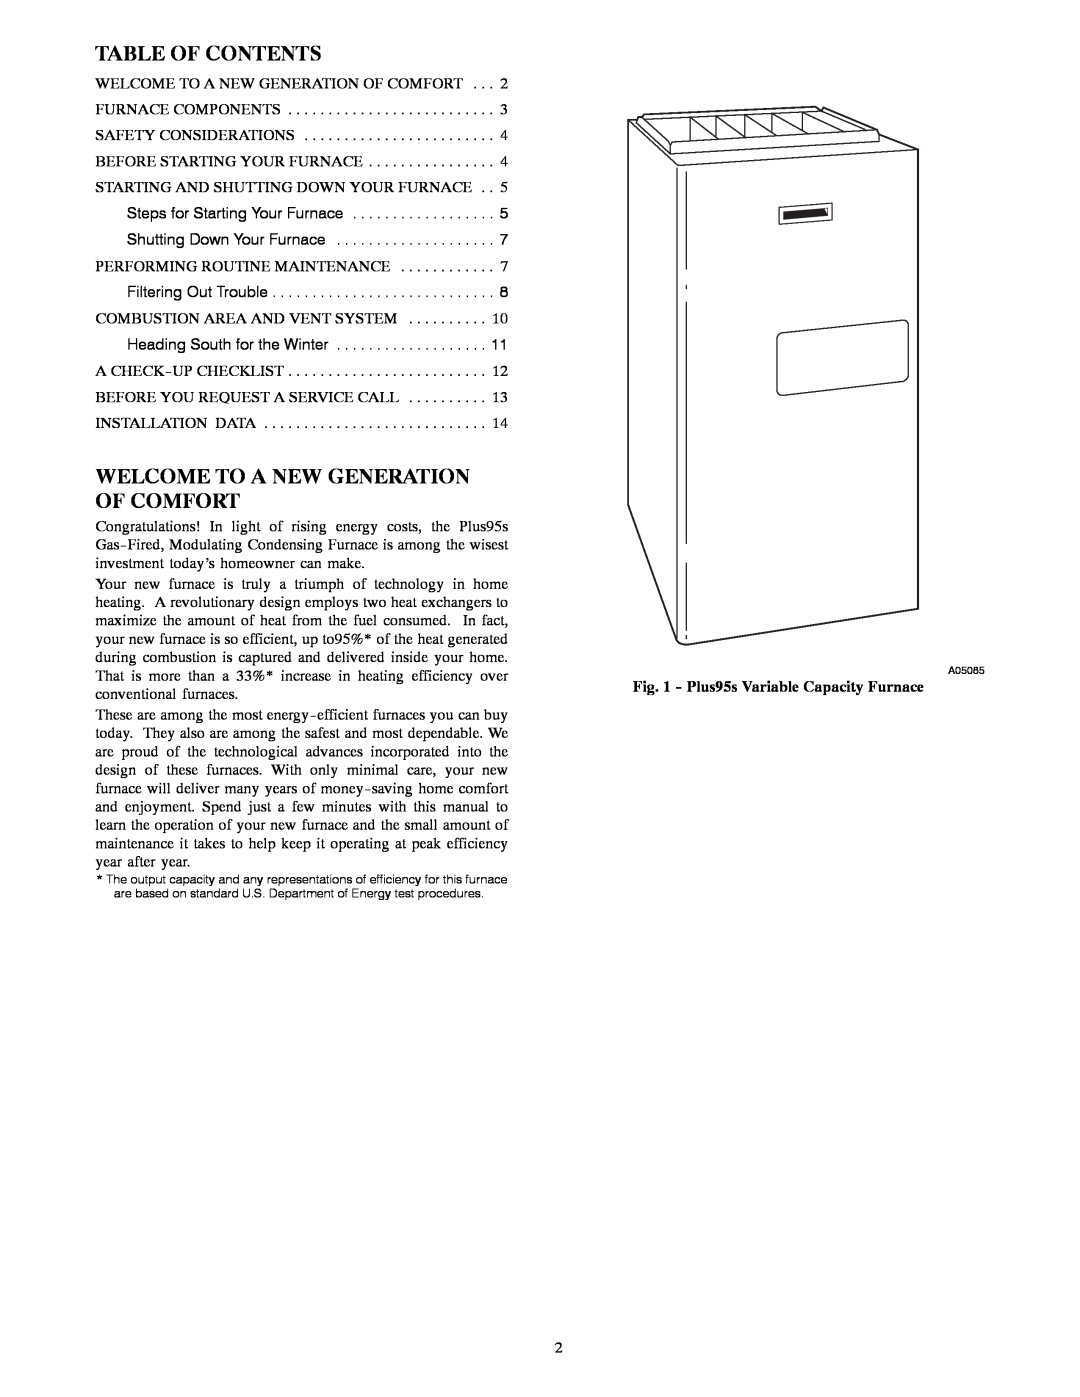 Bryant 355CAV owner manual Table Of Contents, Welcome To A New Generation Of Comfort, Plus95s Variable Capacity Furnace 